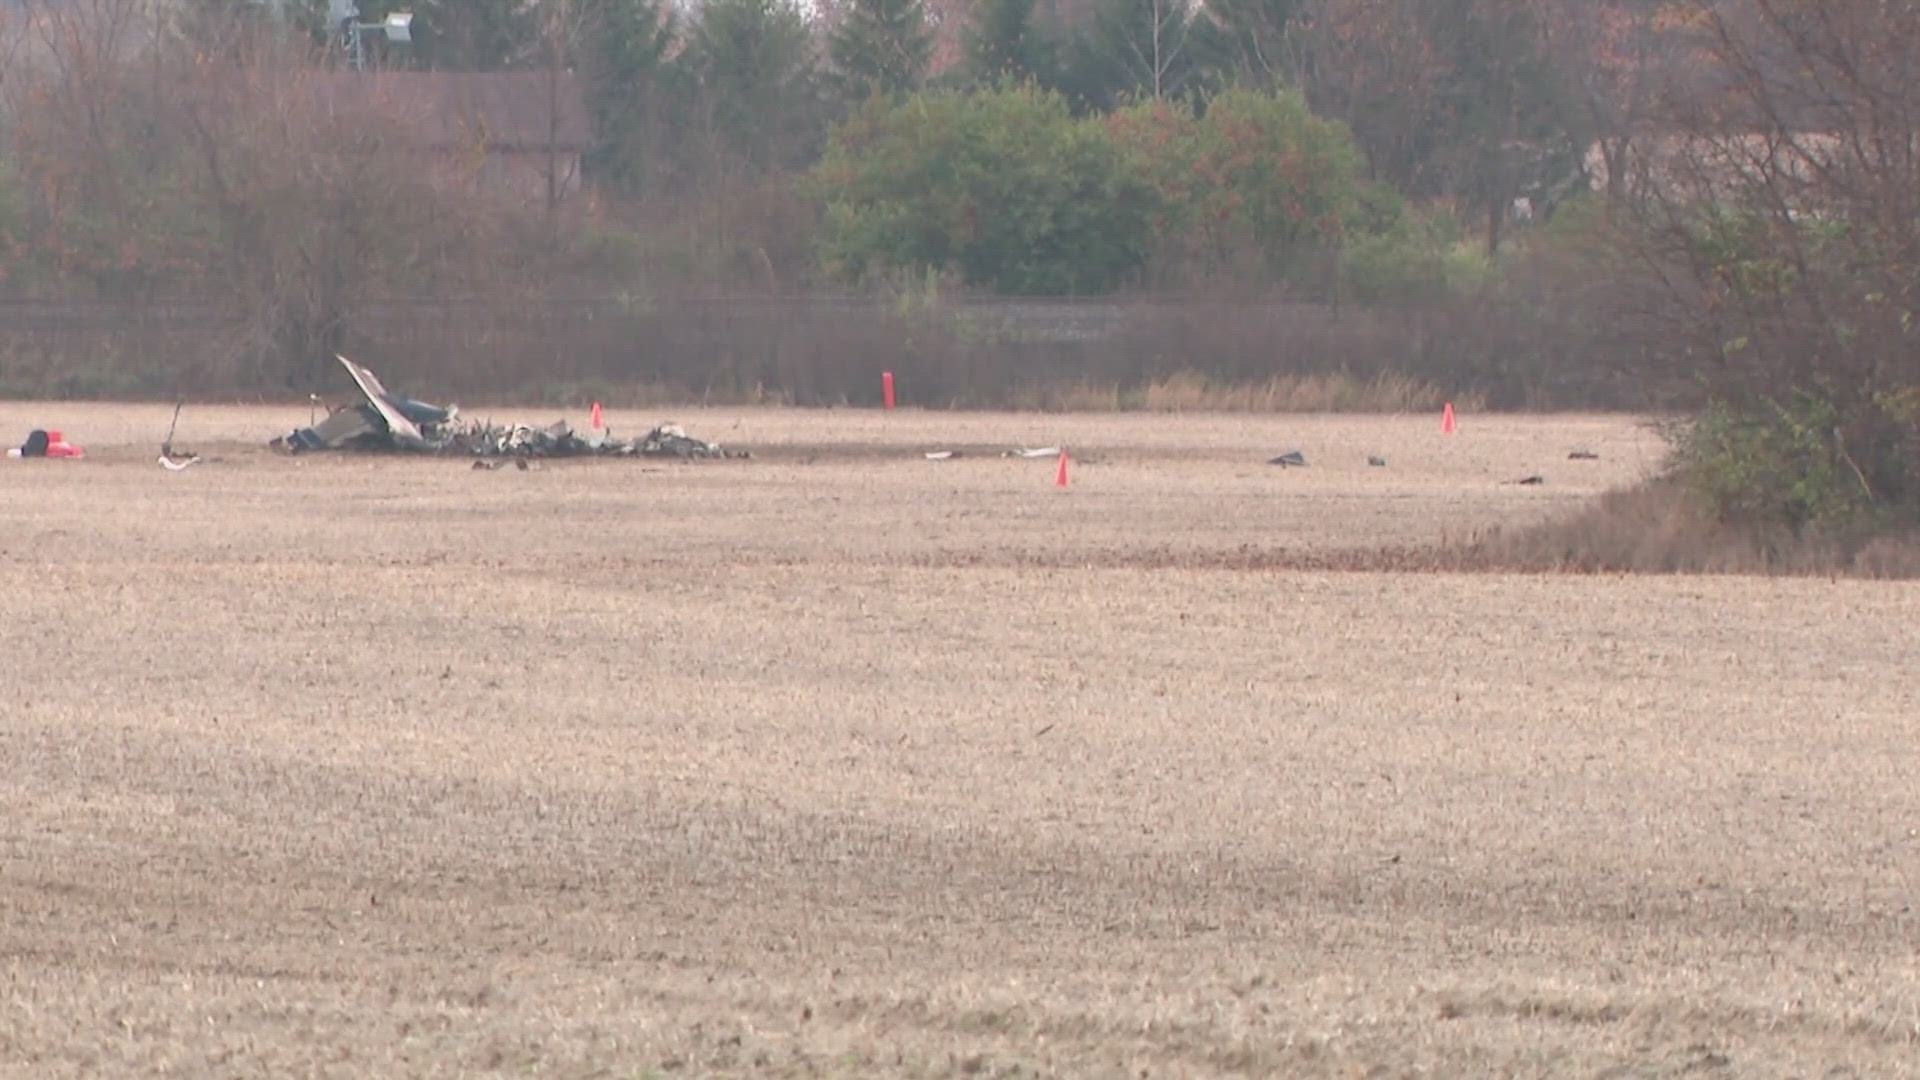 At least one person is dead after a single-engine plane crashed in Marion County Tuesday morning, according to the Ohio State Highway Patrol.